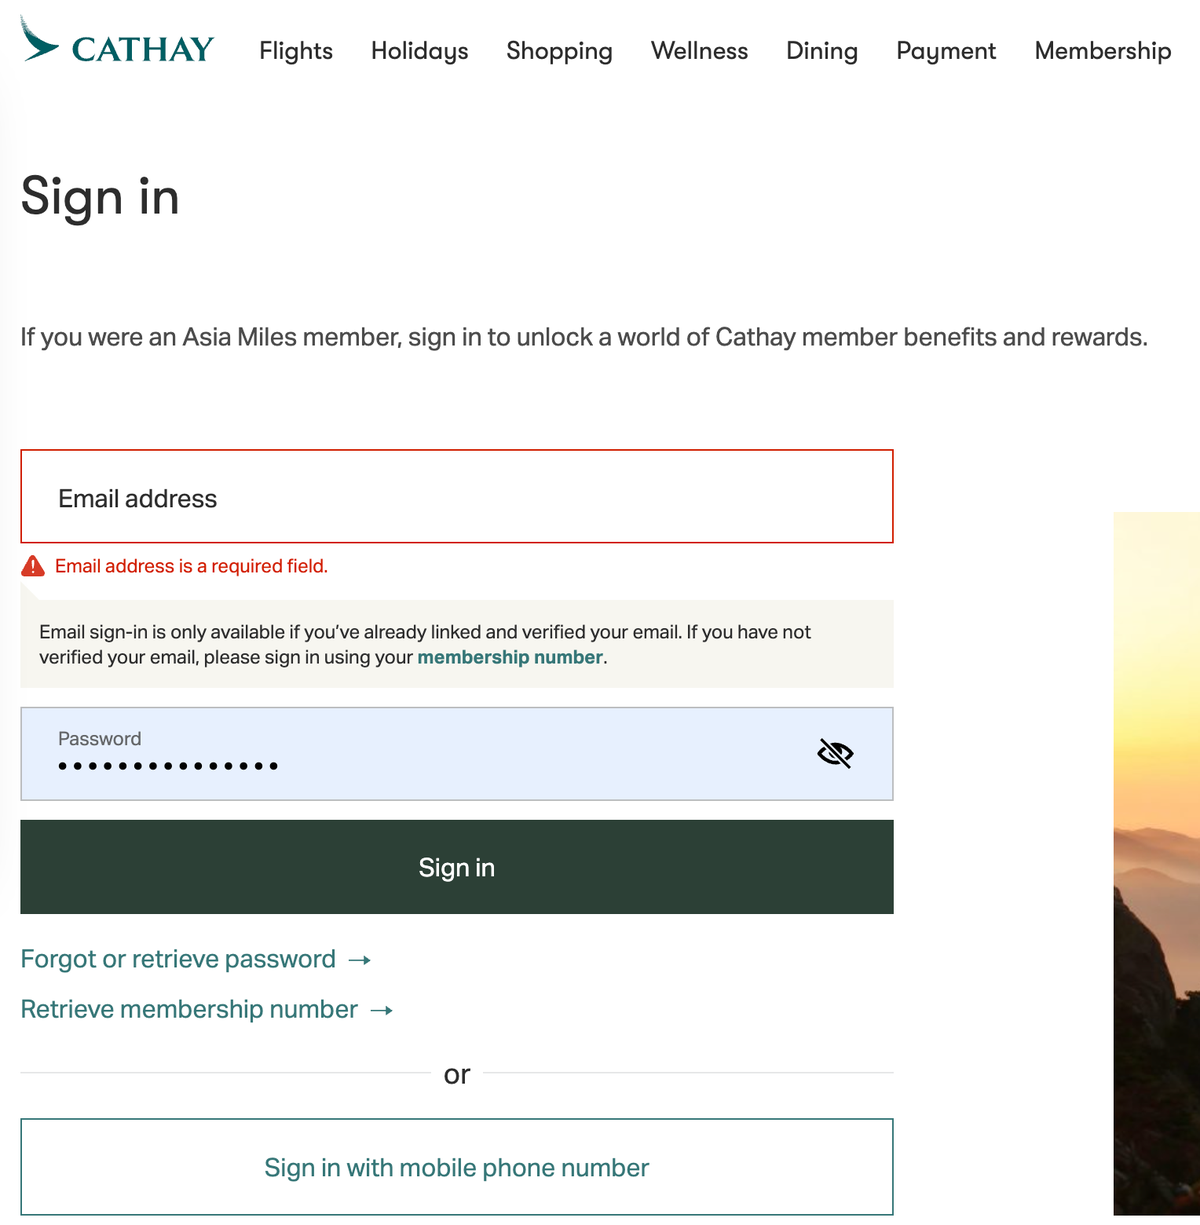 Cathay program log in page